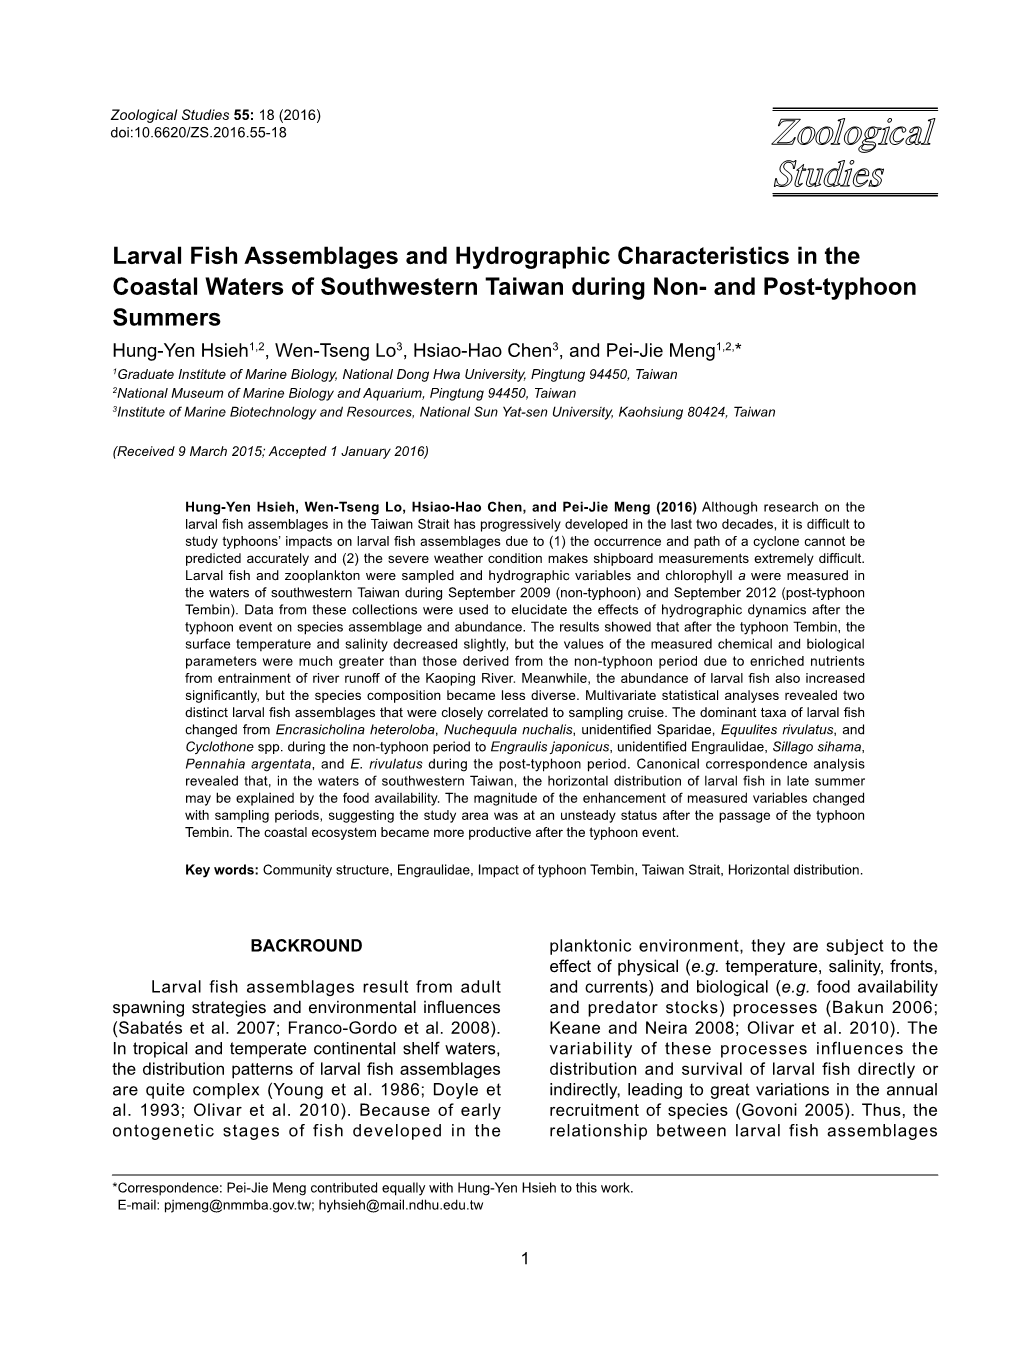 Larval Fish Assemblages and Hydrographic